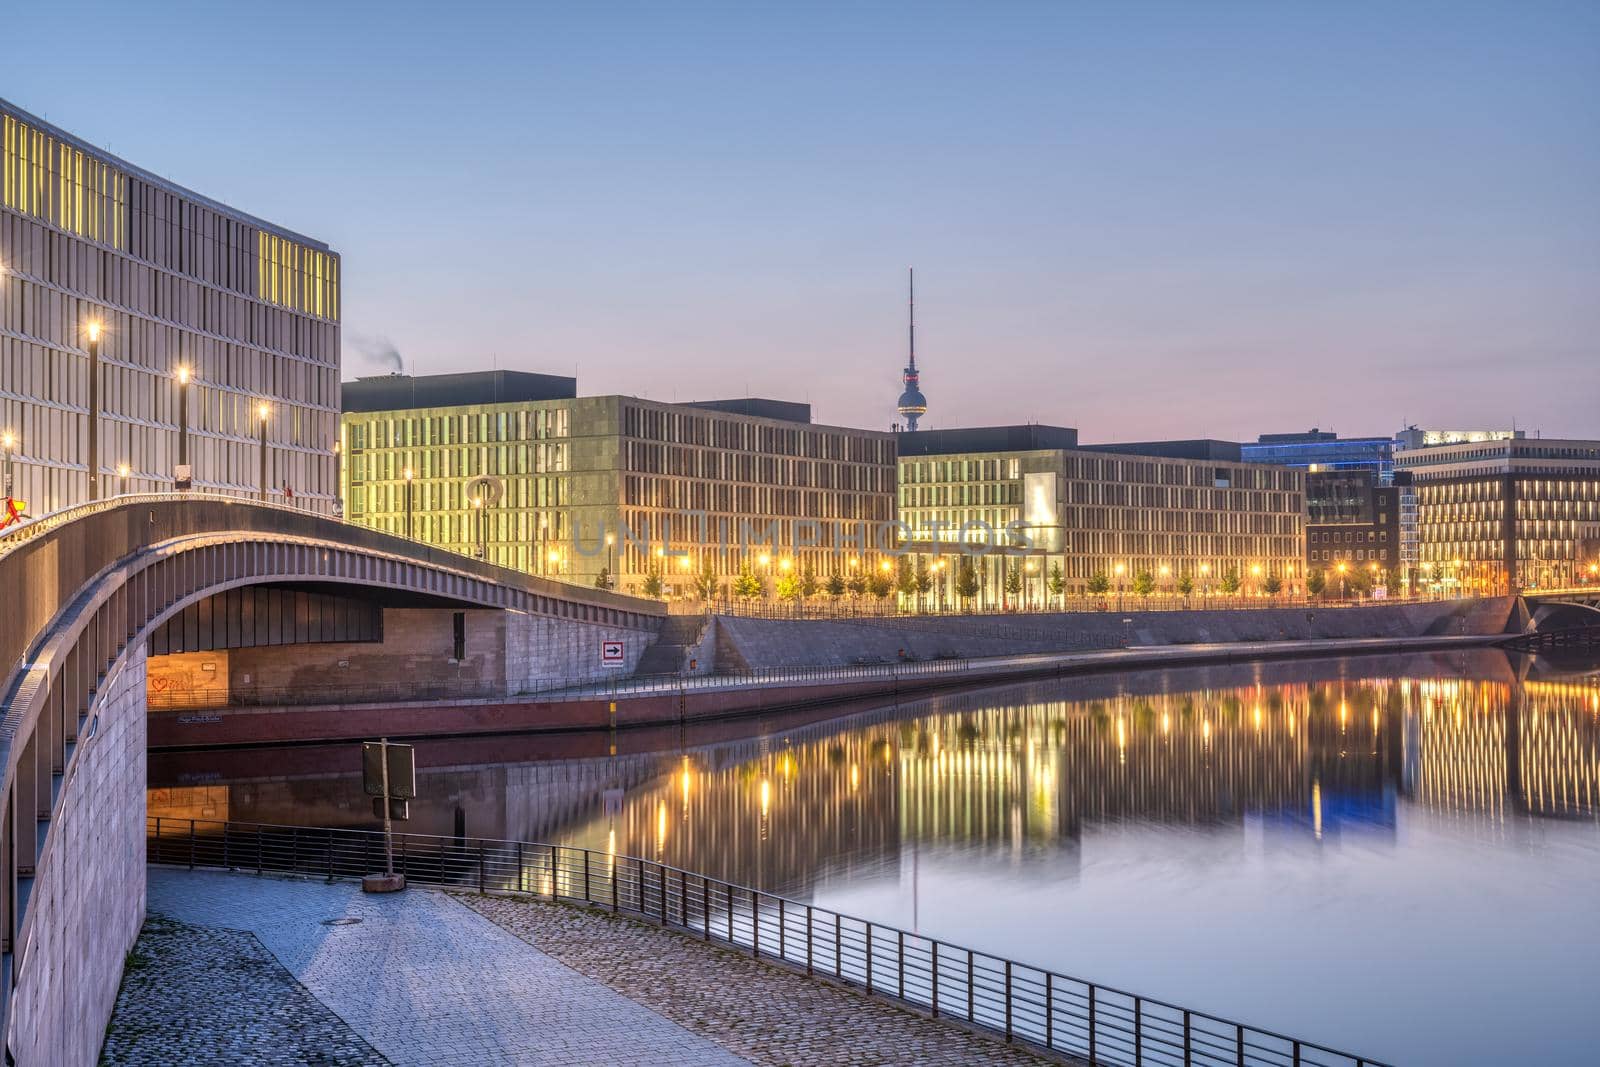 Early in the morning at the river Spree in Berlin by elxeneize